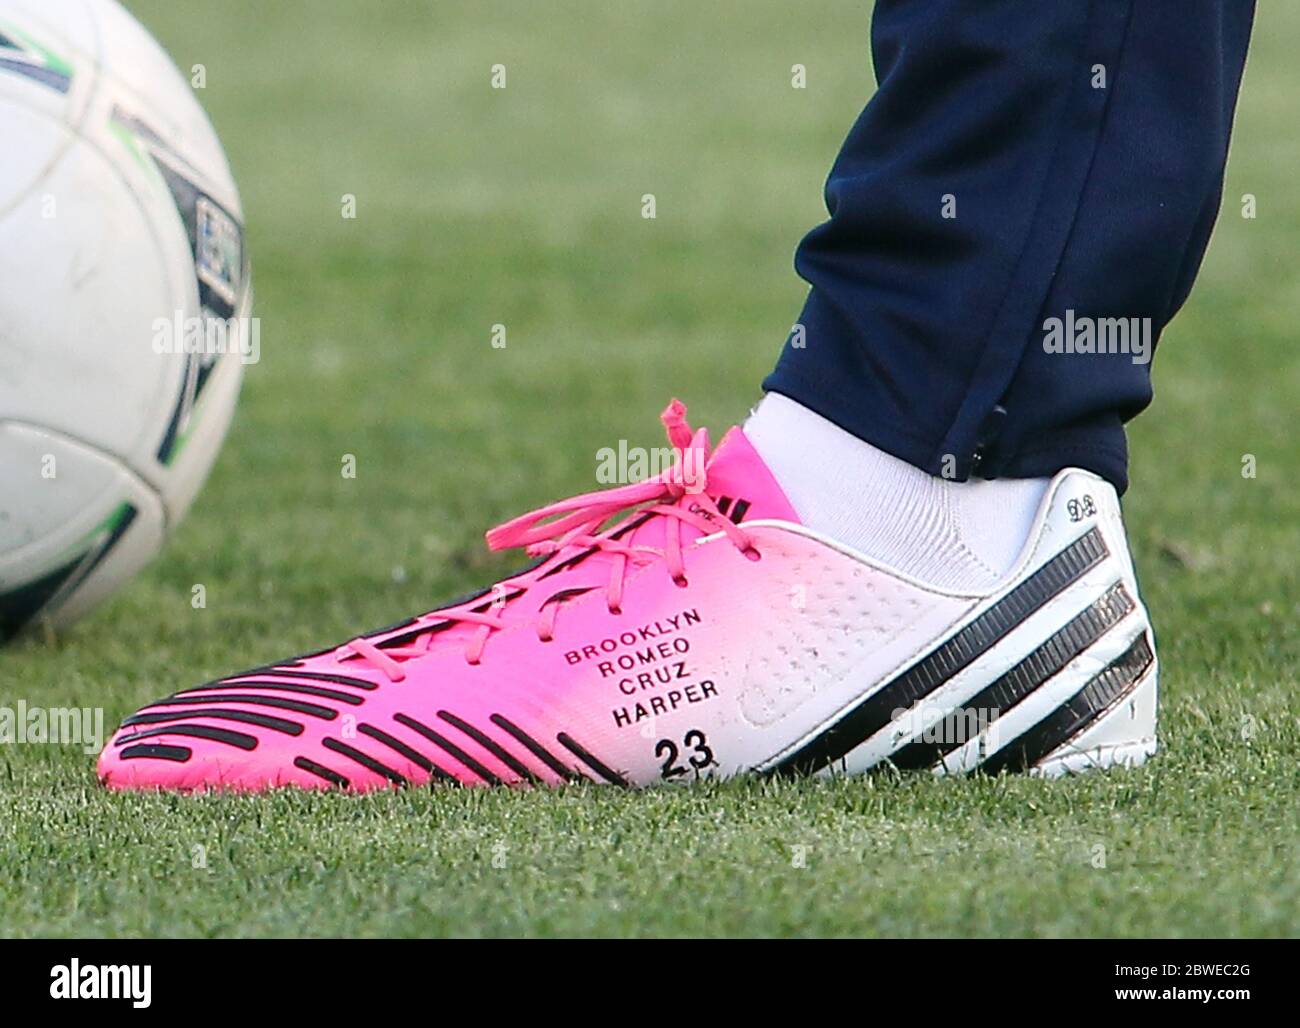 David Beckham wears pink football boots with his childrens names on them as  he came on as a substitute in LA Galaxy's 1-0 defeat to Chivas USA, Carson,  California. 19 May 2012